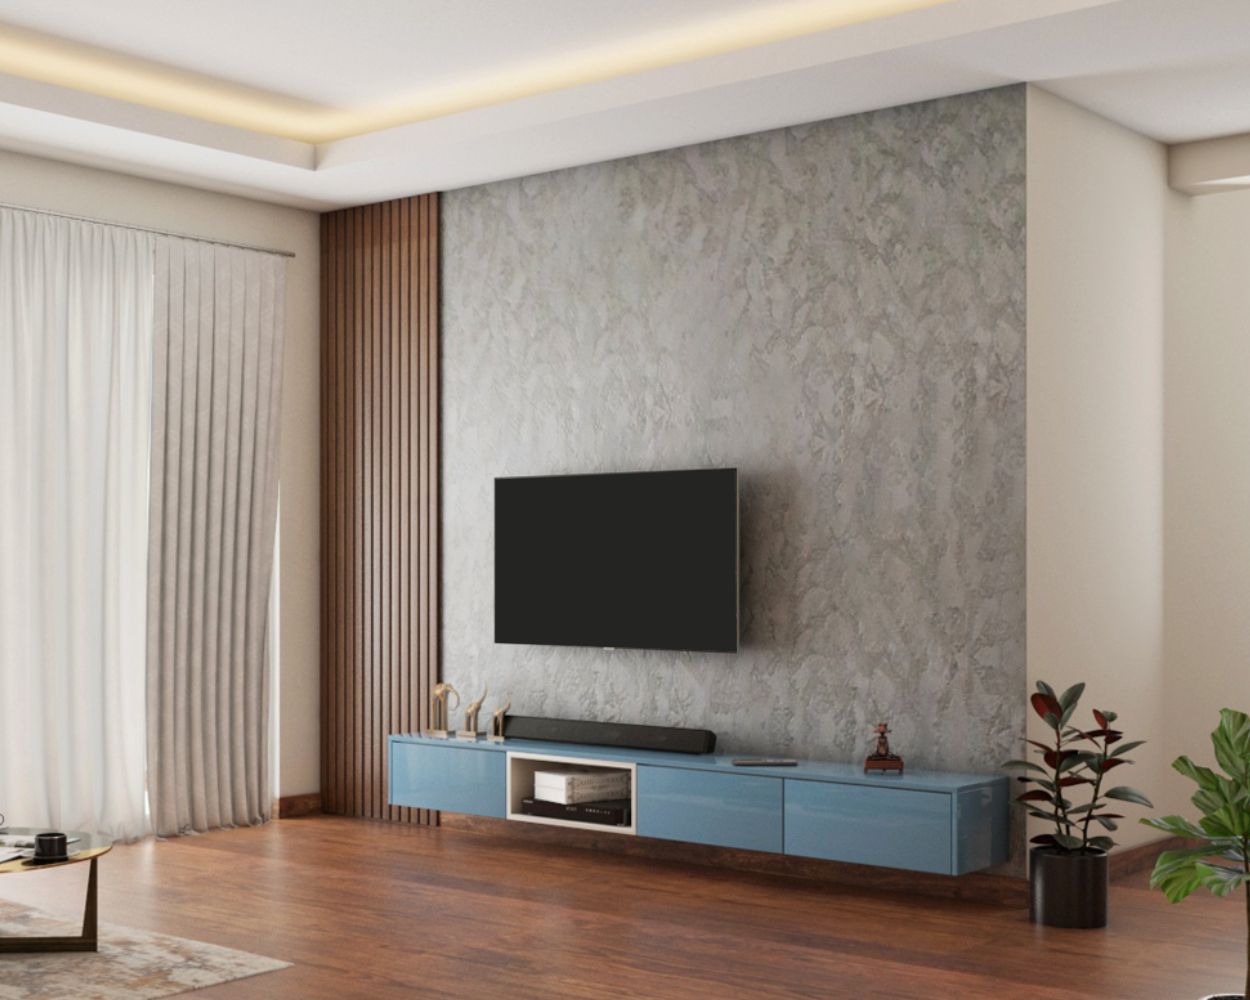 Modern Glossy Blue TV Unit Design With Grey Textured Wallpaper And Wooden Panelling